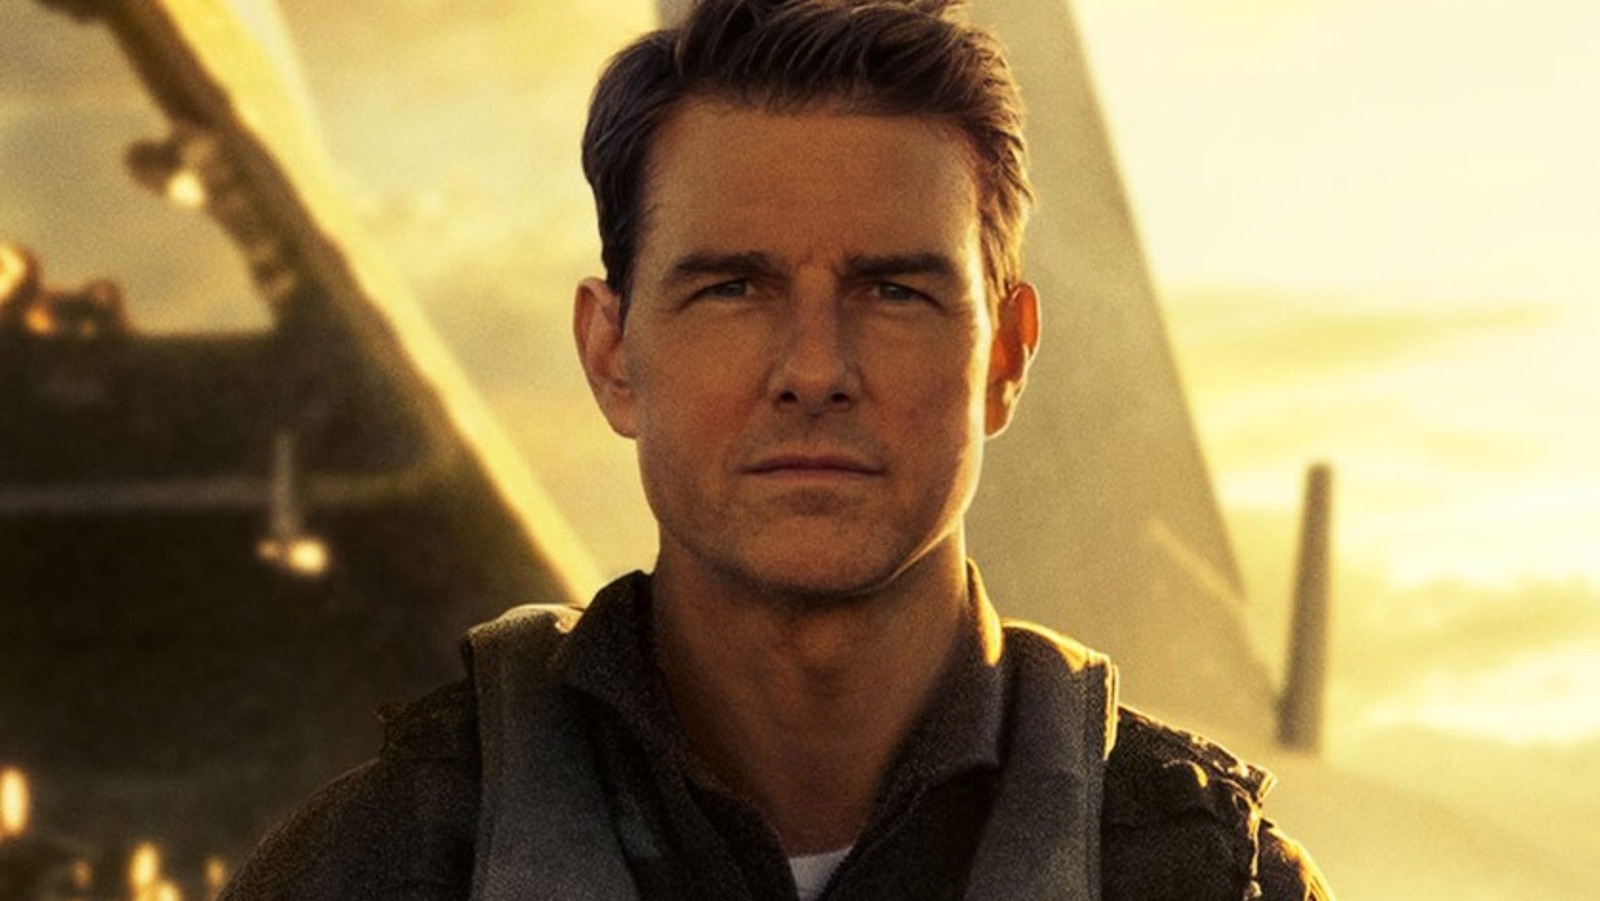 Top Gun: Maverick Is Holding Strong With Massive $86 Million Second Weekend  Box Office [Update]